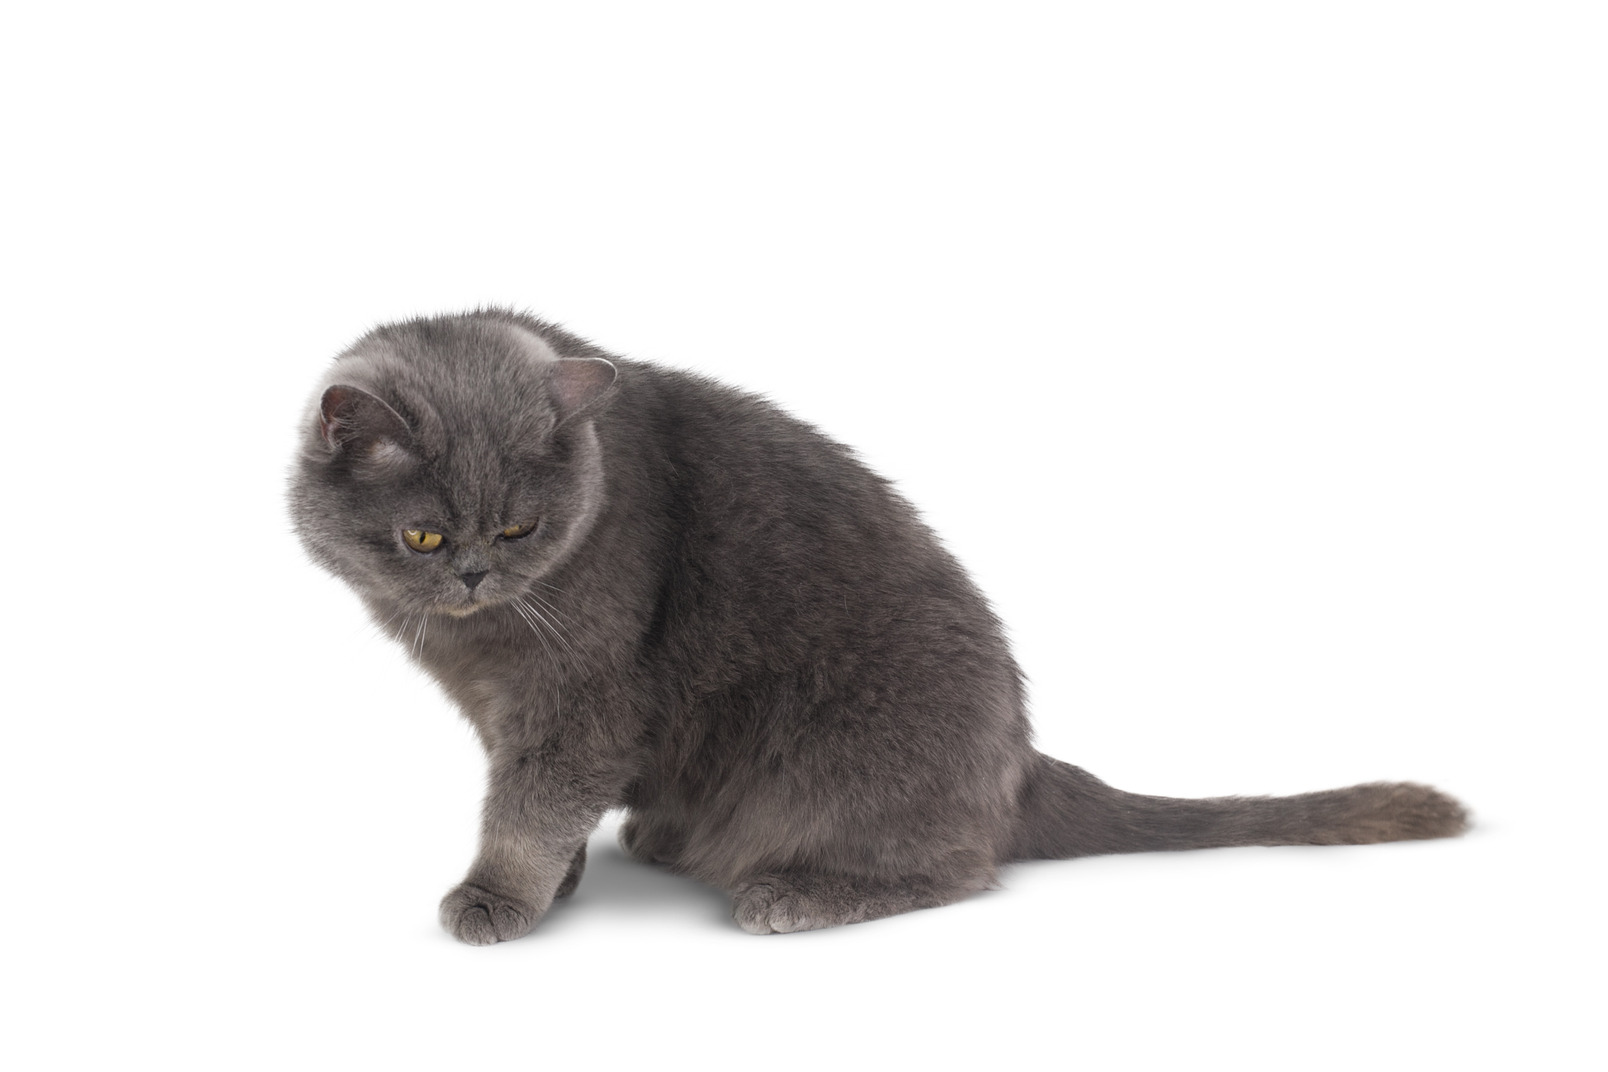 What a nice grey animal cat